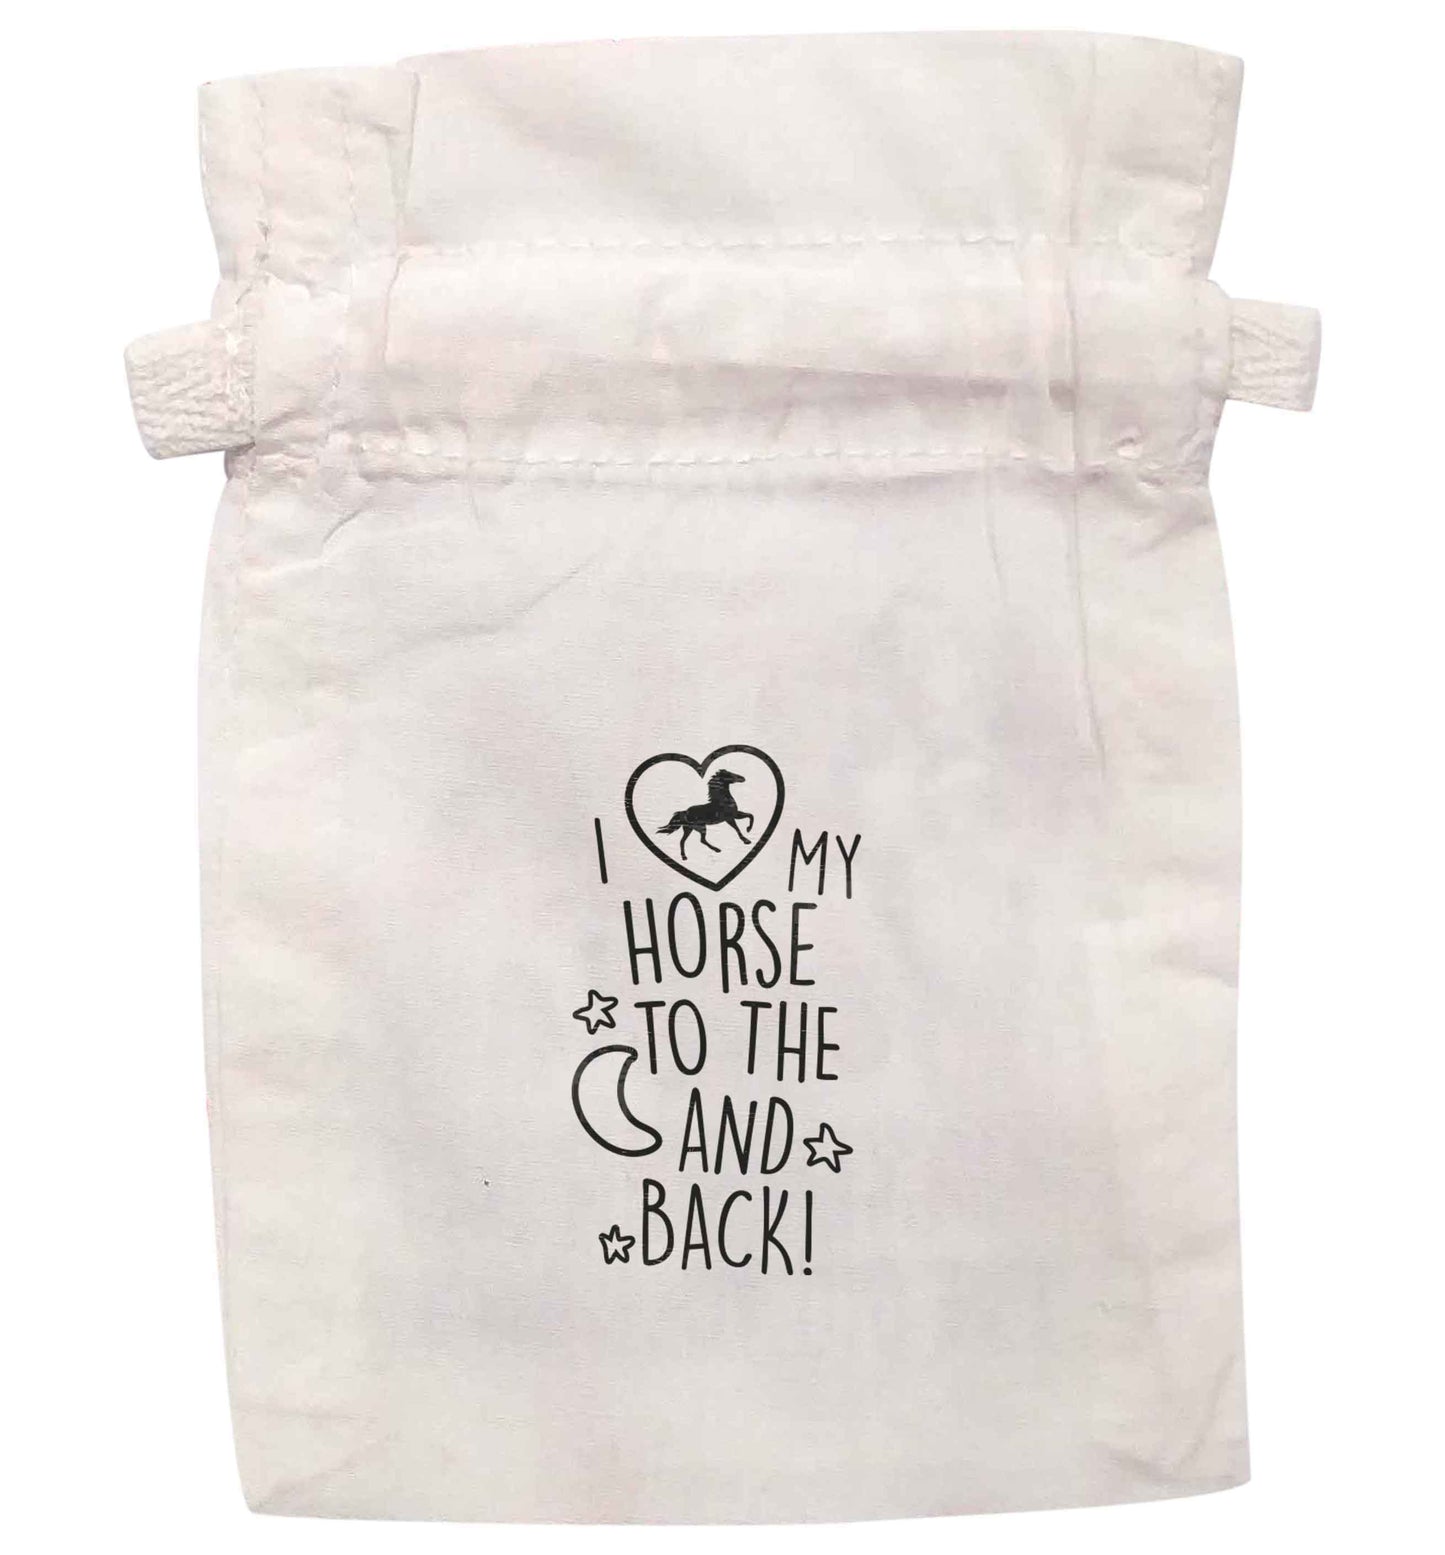 I love my horse to the moon and back | XS - L | Pouch / Drawstring bag / Sack | Organic Cotton | Bulk discounts available!